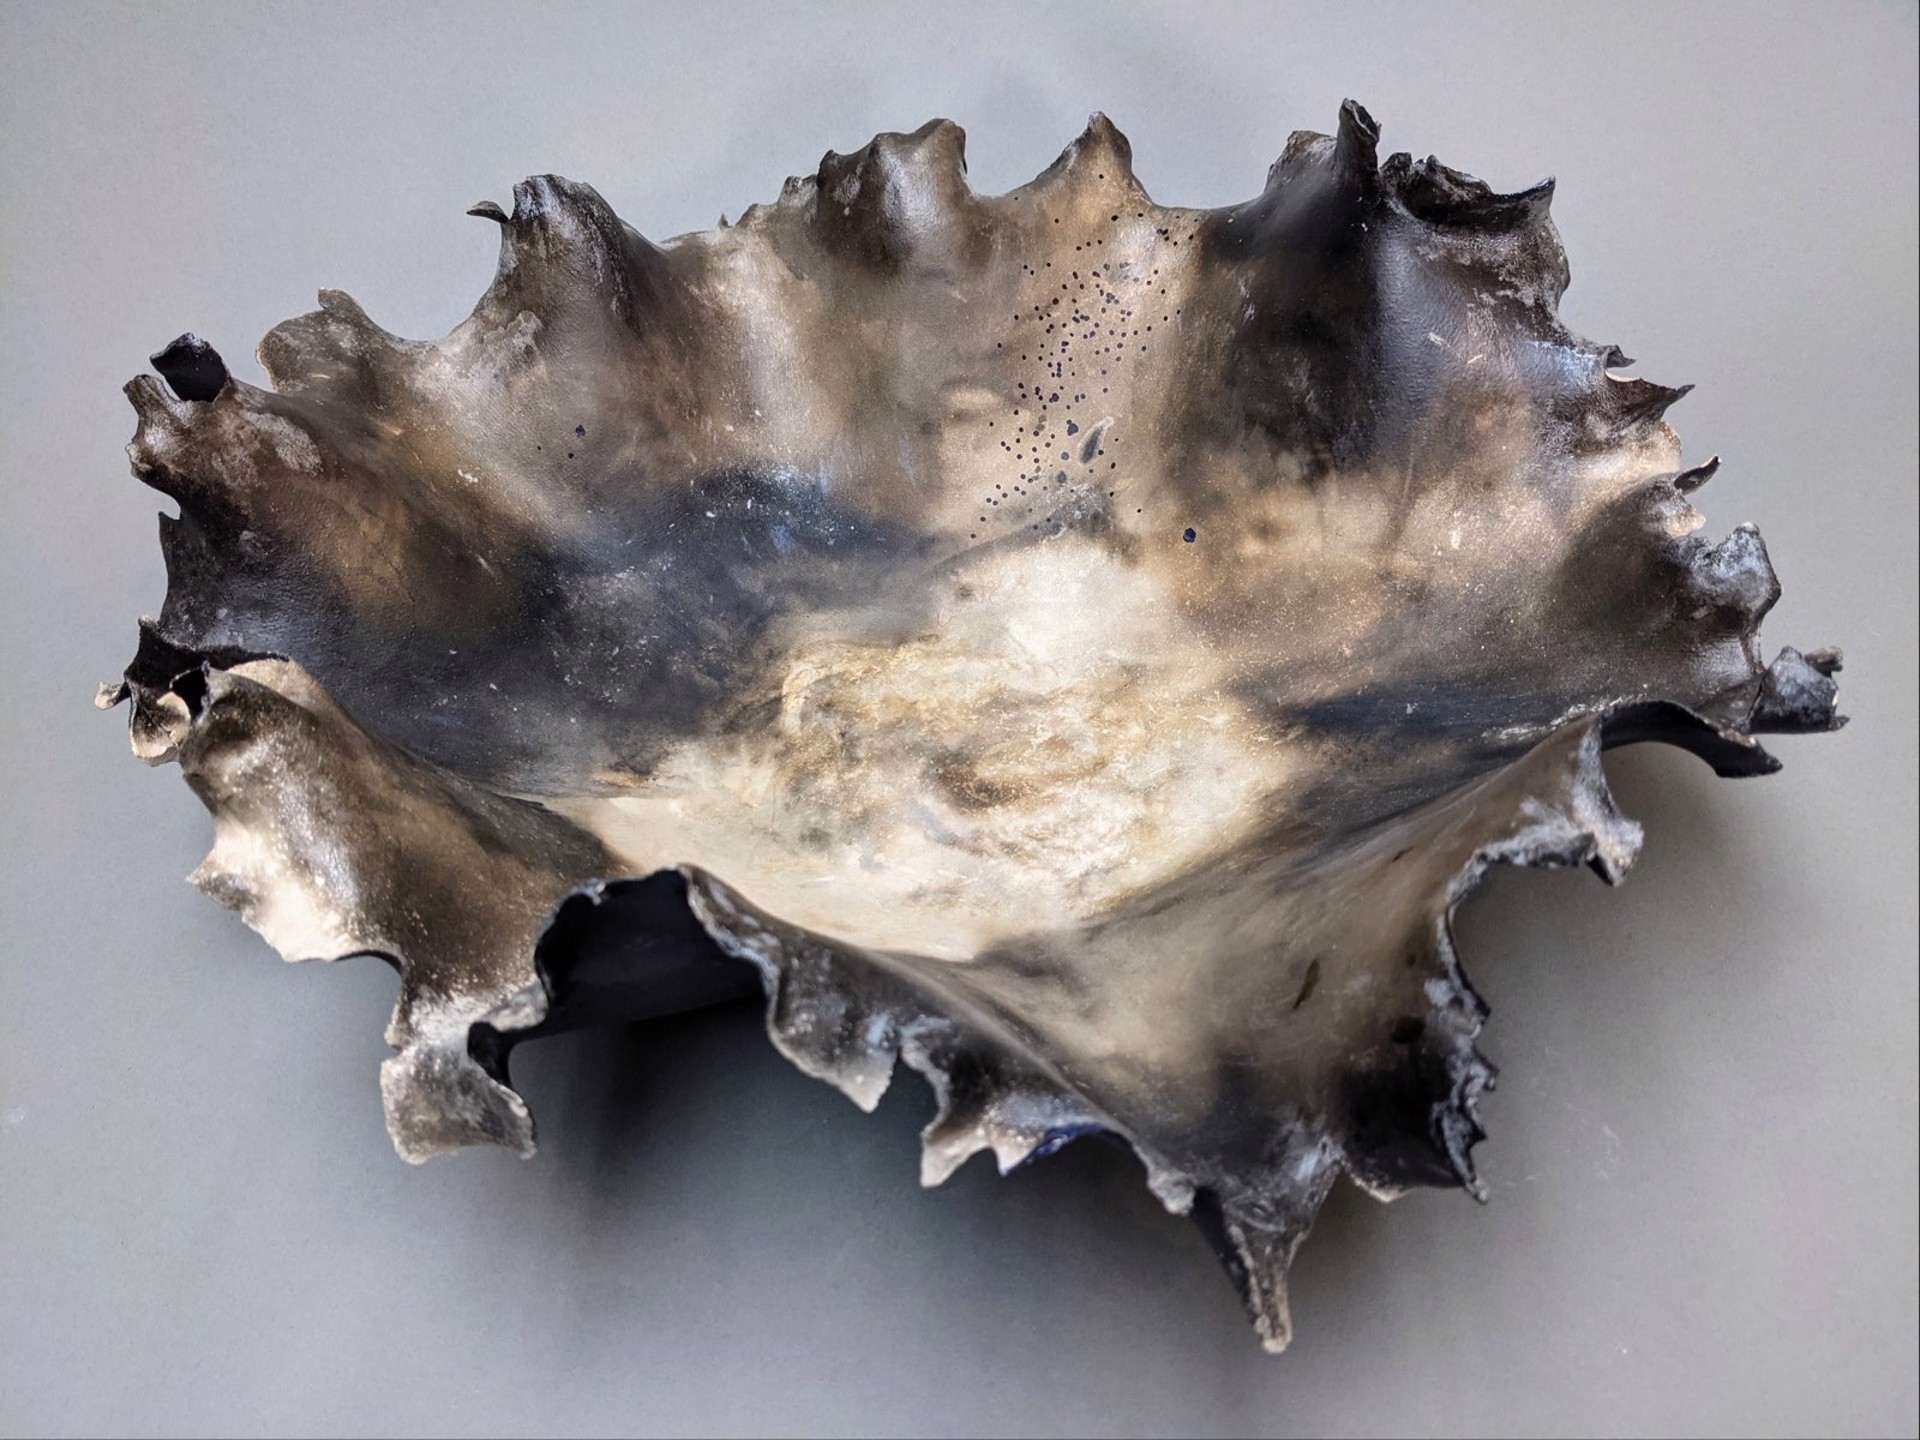 The Oyster Collection by Dawson Morgan